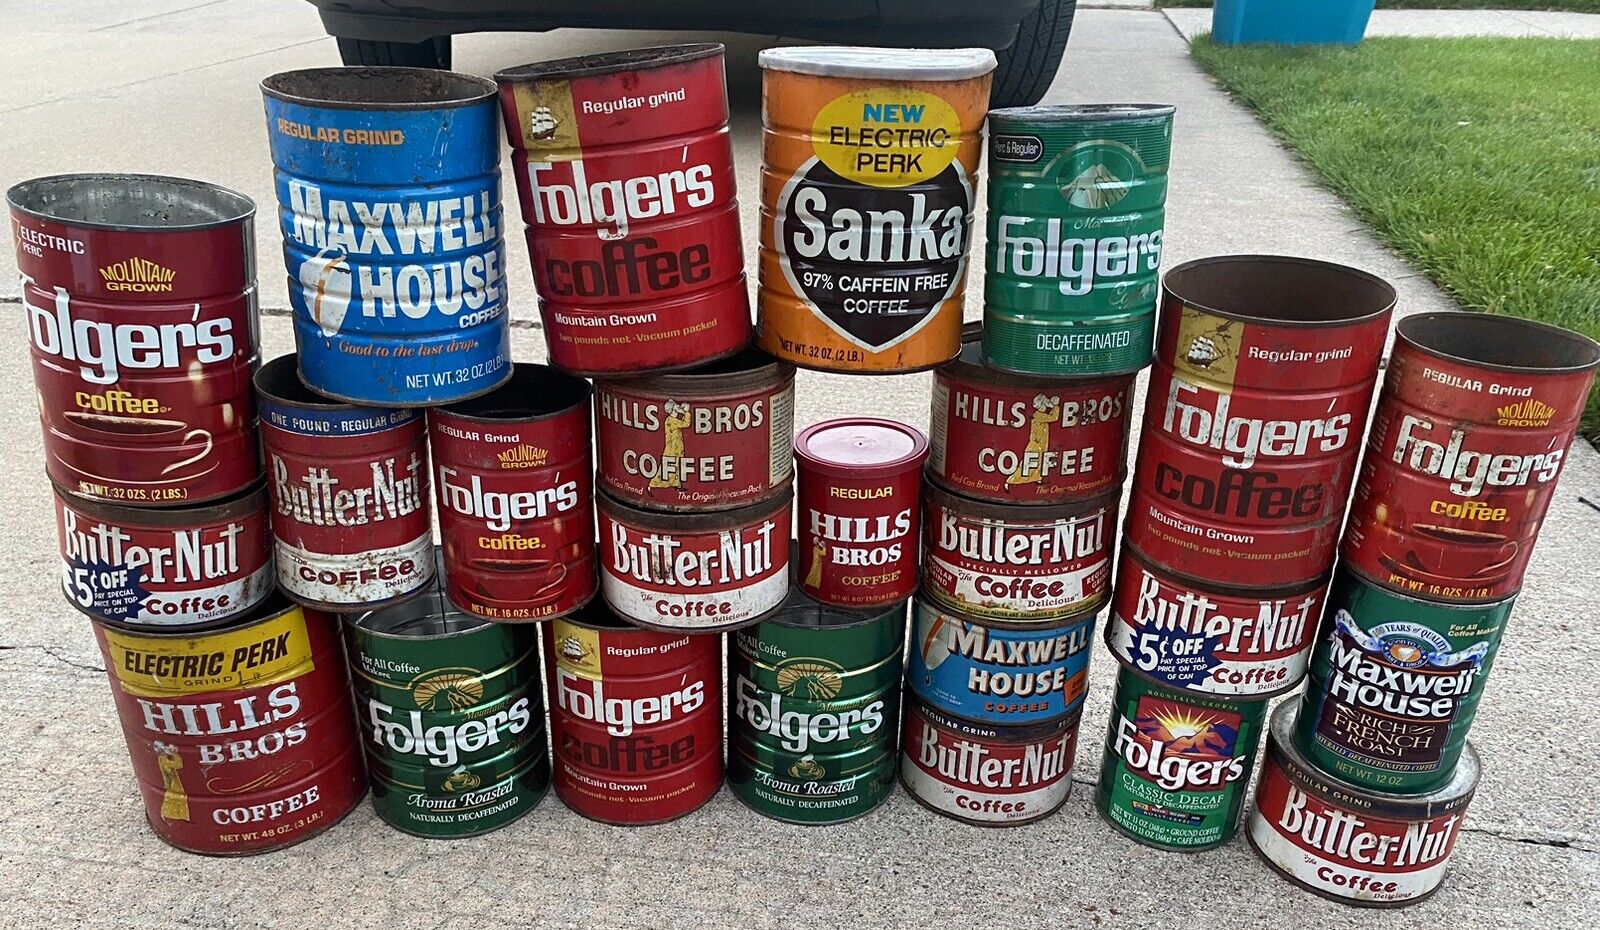 LOT OF (26) VINTAGE COFFEE CANS TINS - Folgers, Butter Nut, Sanka Maxwell House